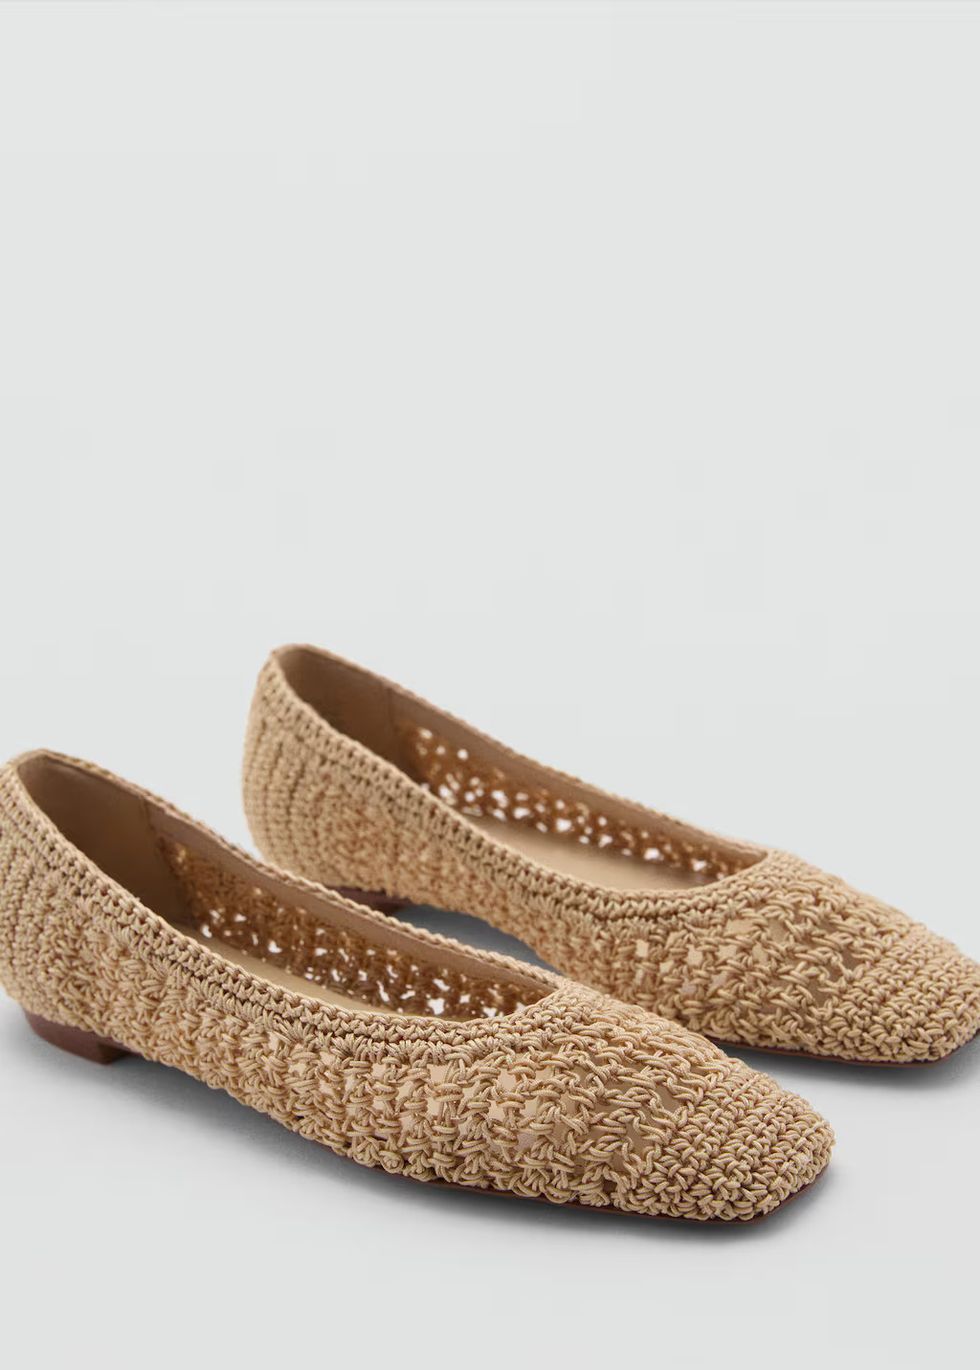 a pair of brown slippers